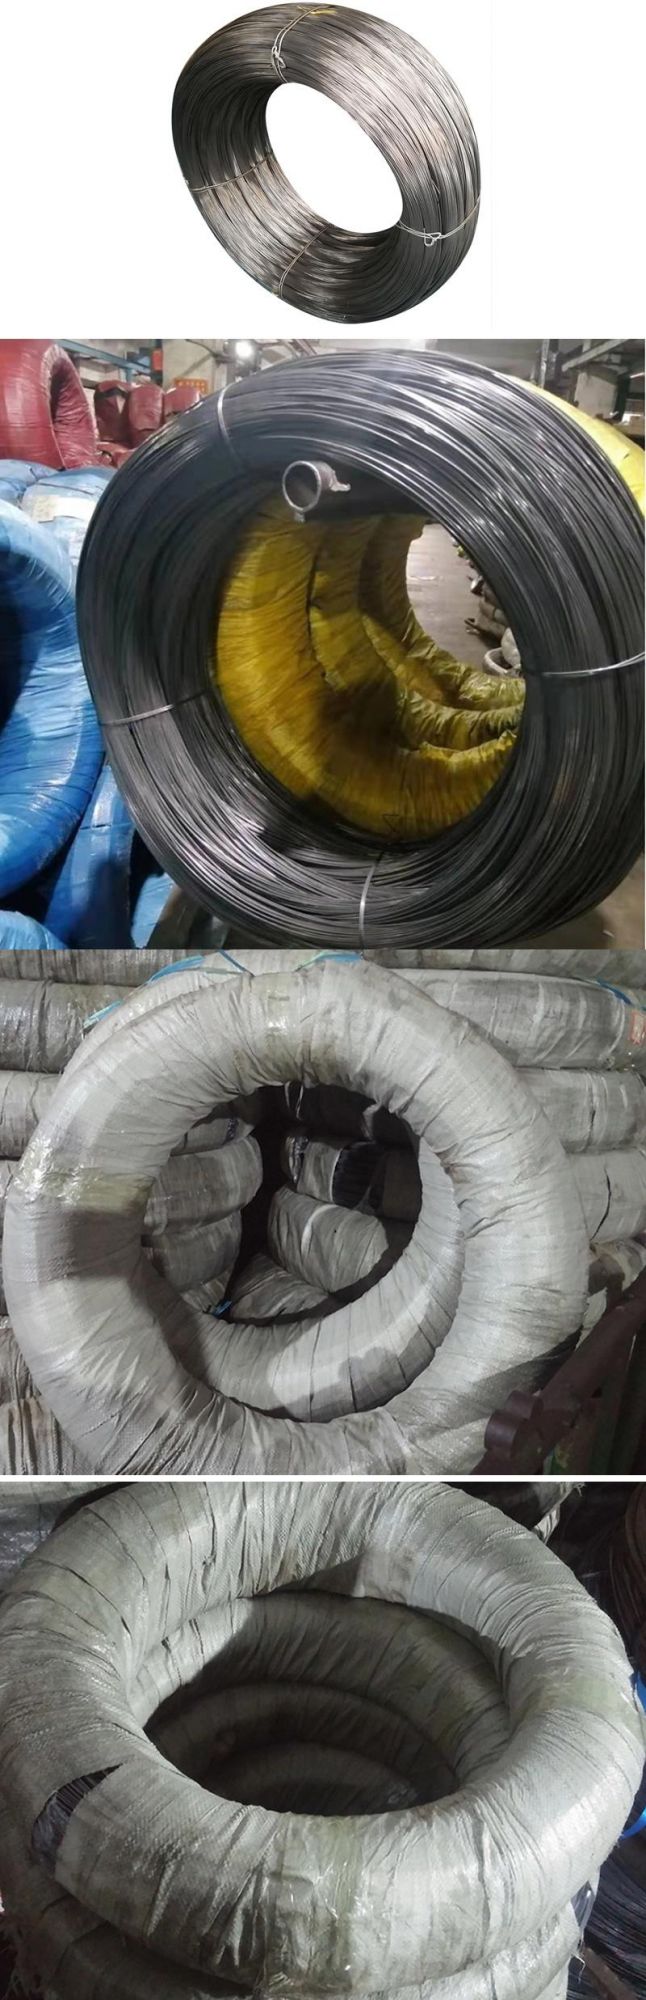 Hot Selling 1mm-5mm High Carbon Steel Wire for Mattress